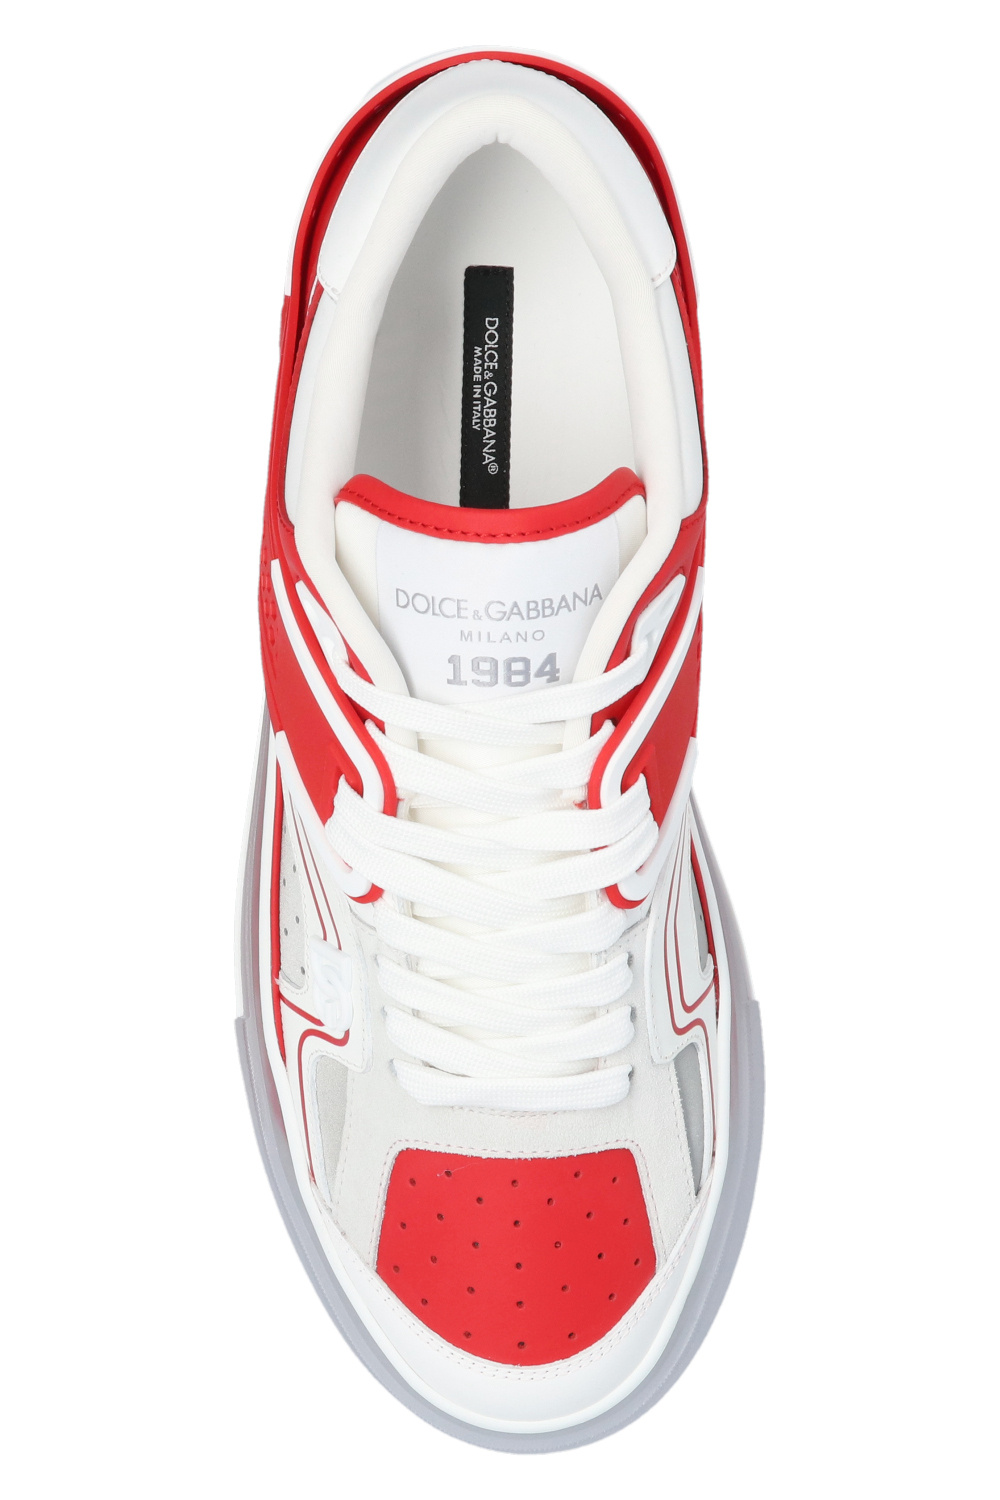 the reborn to live collection patched t shirt dolce gabbana t shirt ‘Custom 2.Zero’ sneakers